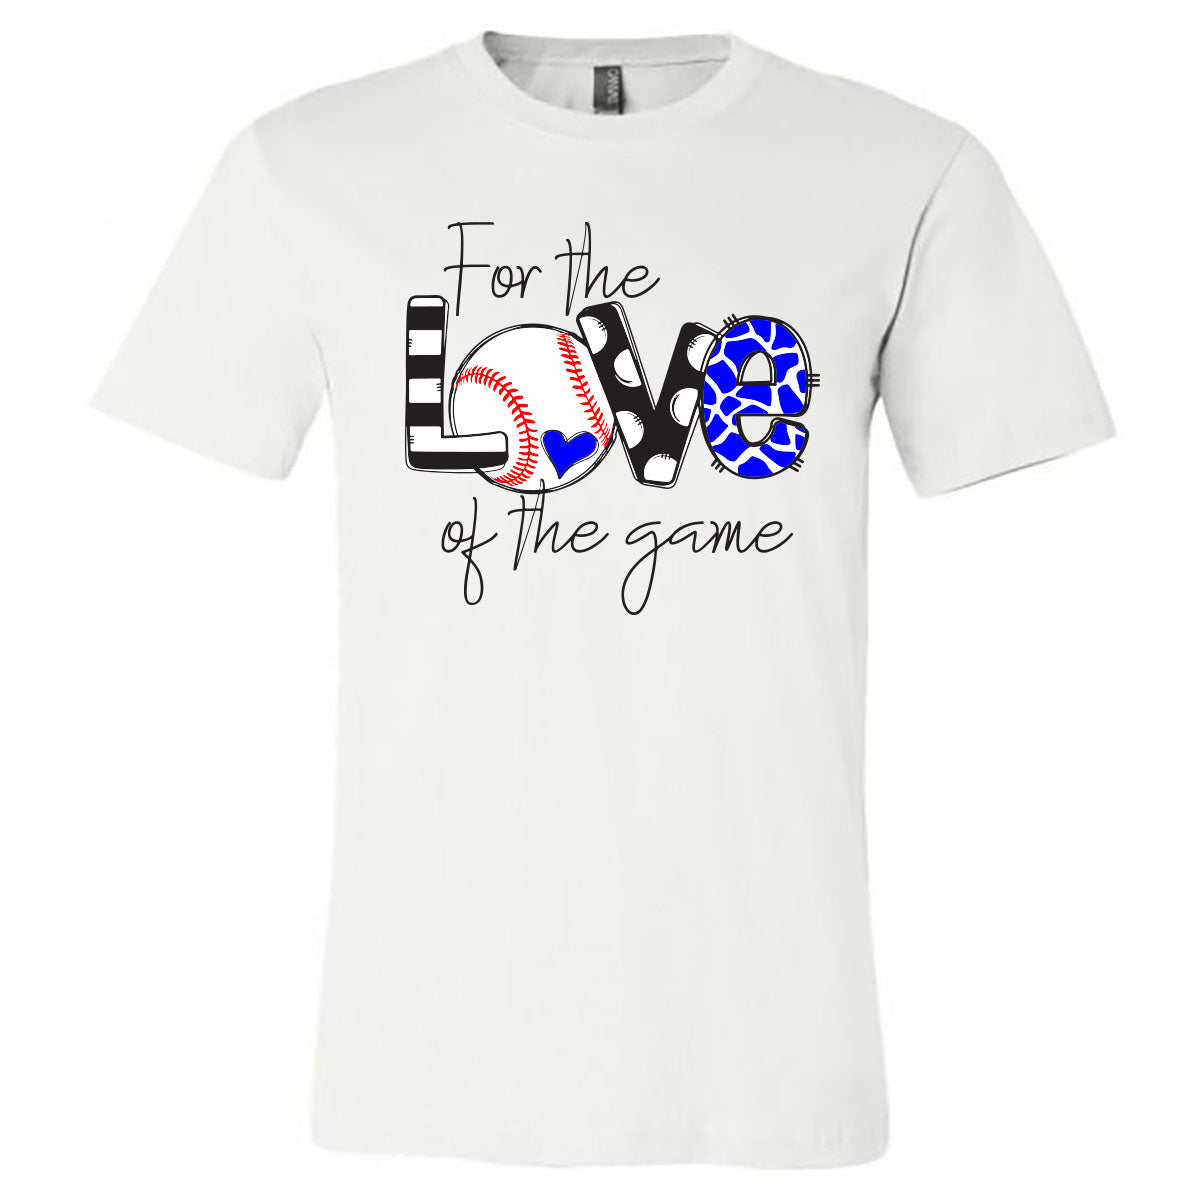 Windsor - Baseball - For the love of the game - White (Tee/Hoodie/Sweatshirt) - Southern Grace Creations